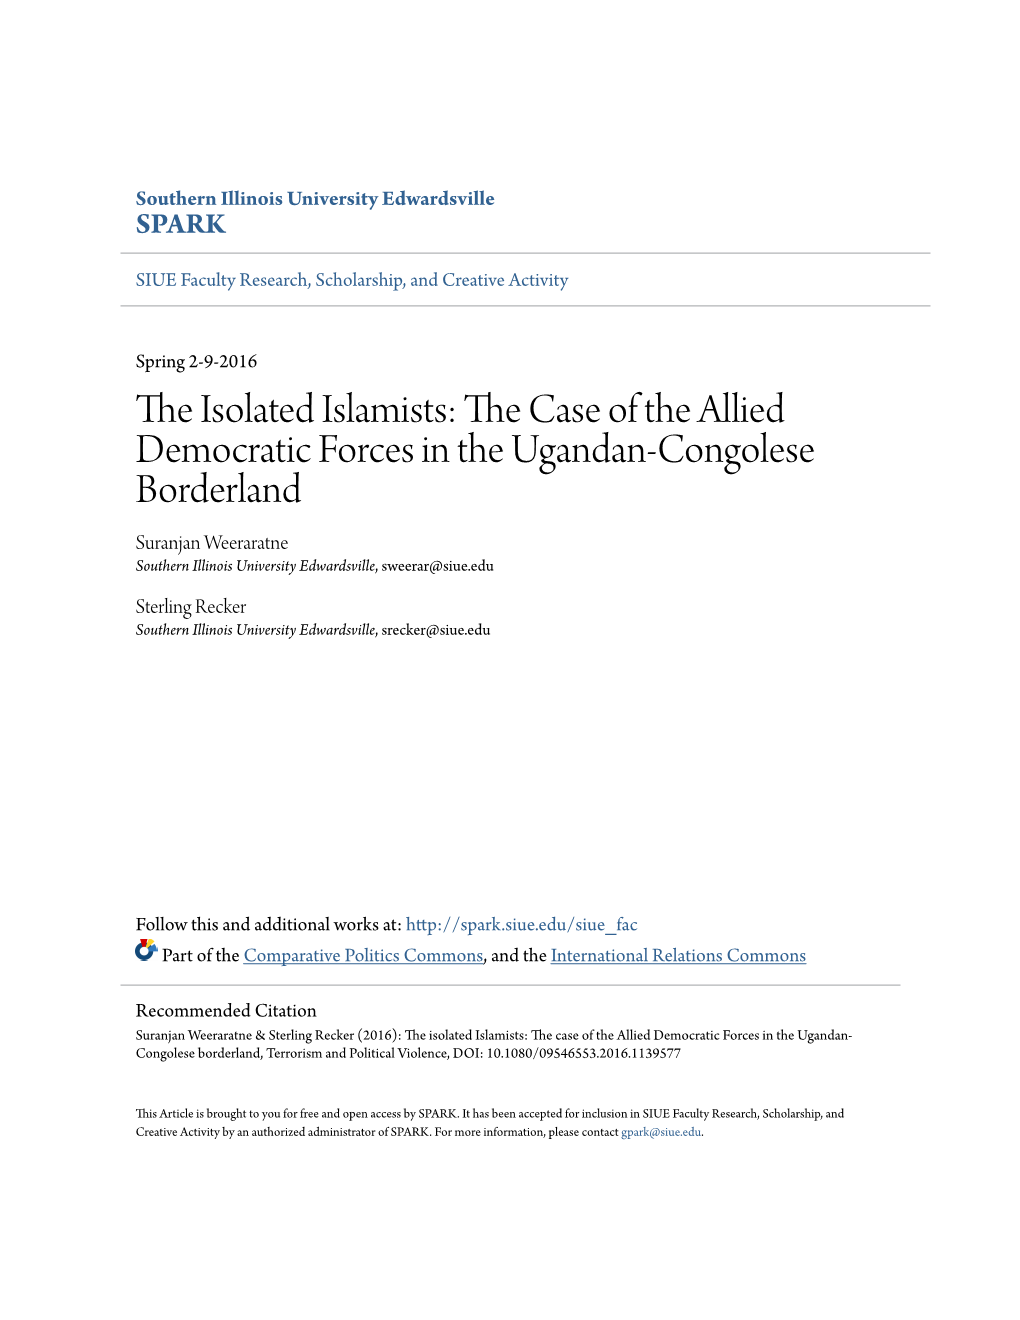 The Case of the Allied Democratic Forces in the Ugandan- Congolese Borderland, Terrorism and Political Violence, DOI: 10.1080/09546553.2016.1139577